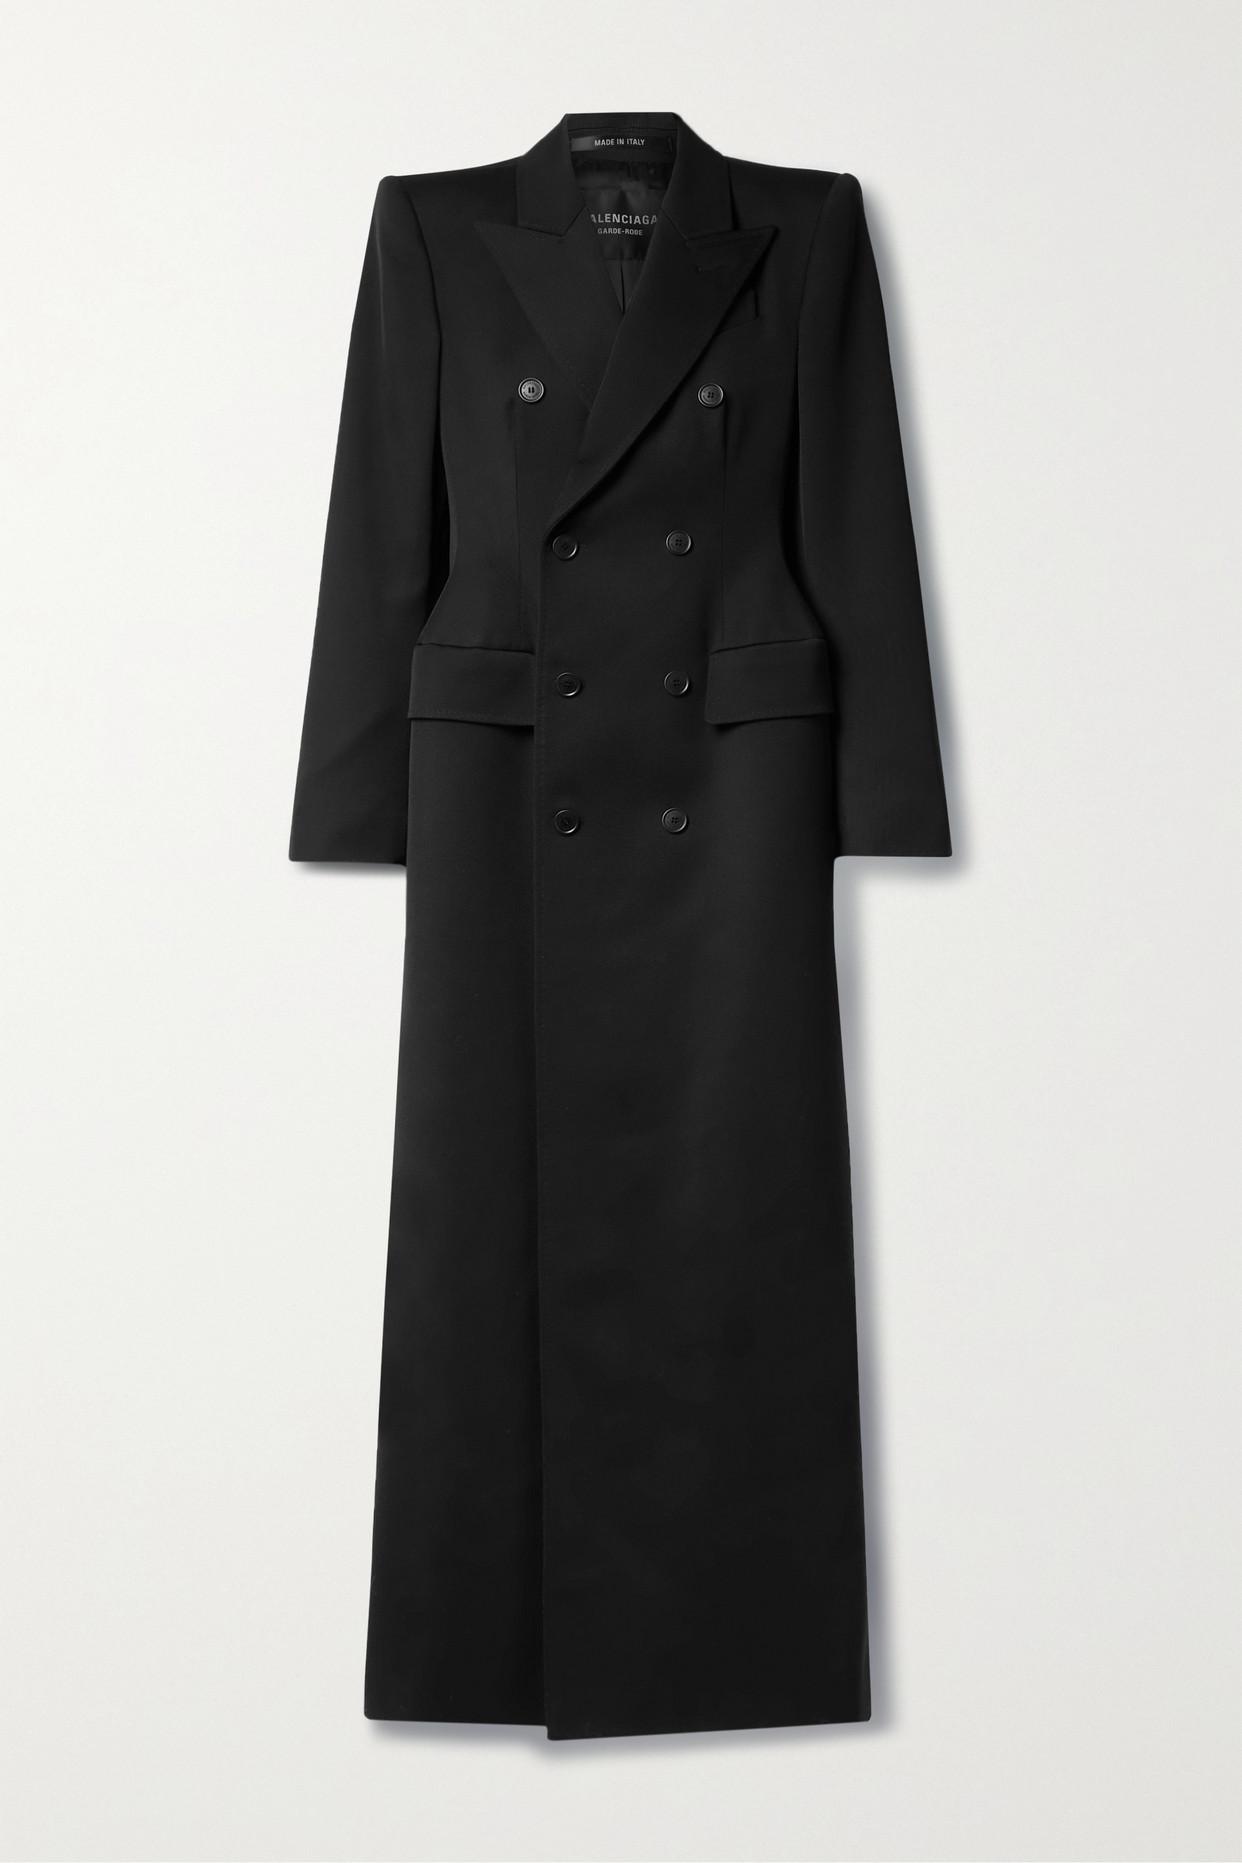 Balenciaga Hourglass Double-breasted Wool-twill Coat in Black | Lyst UK